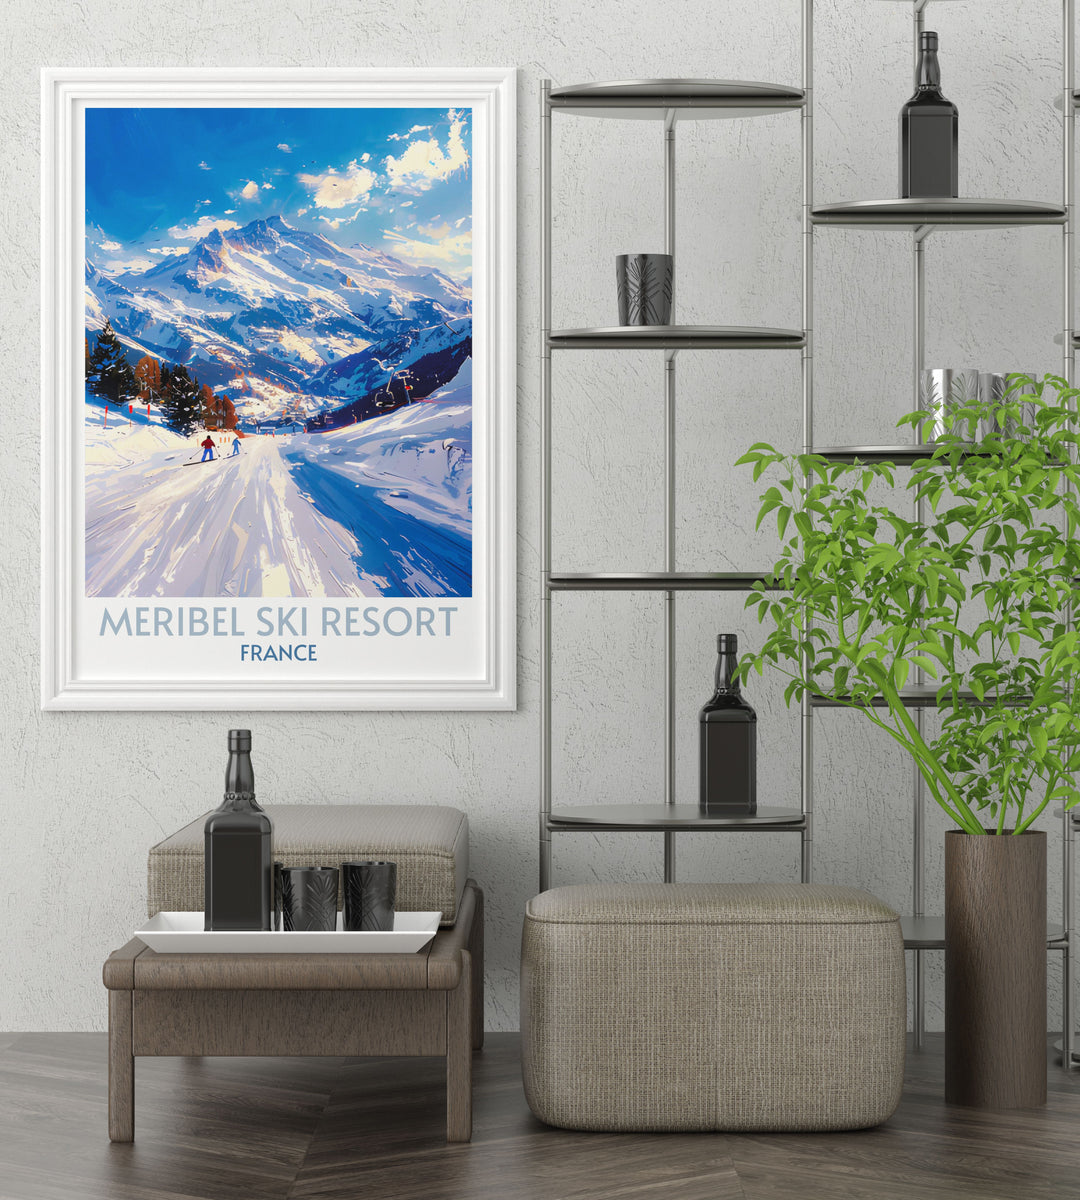 Ski slopes canvas art from Meribel, illustrating the serene early morning ready for the days first descent.